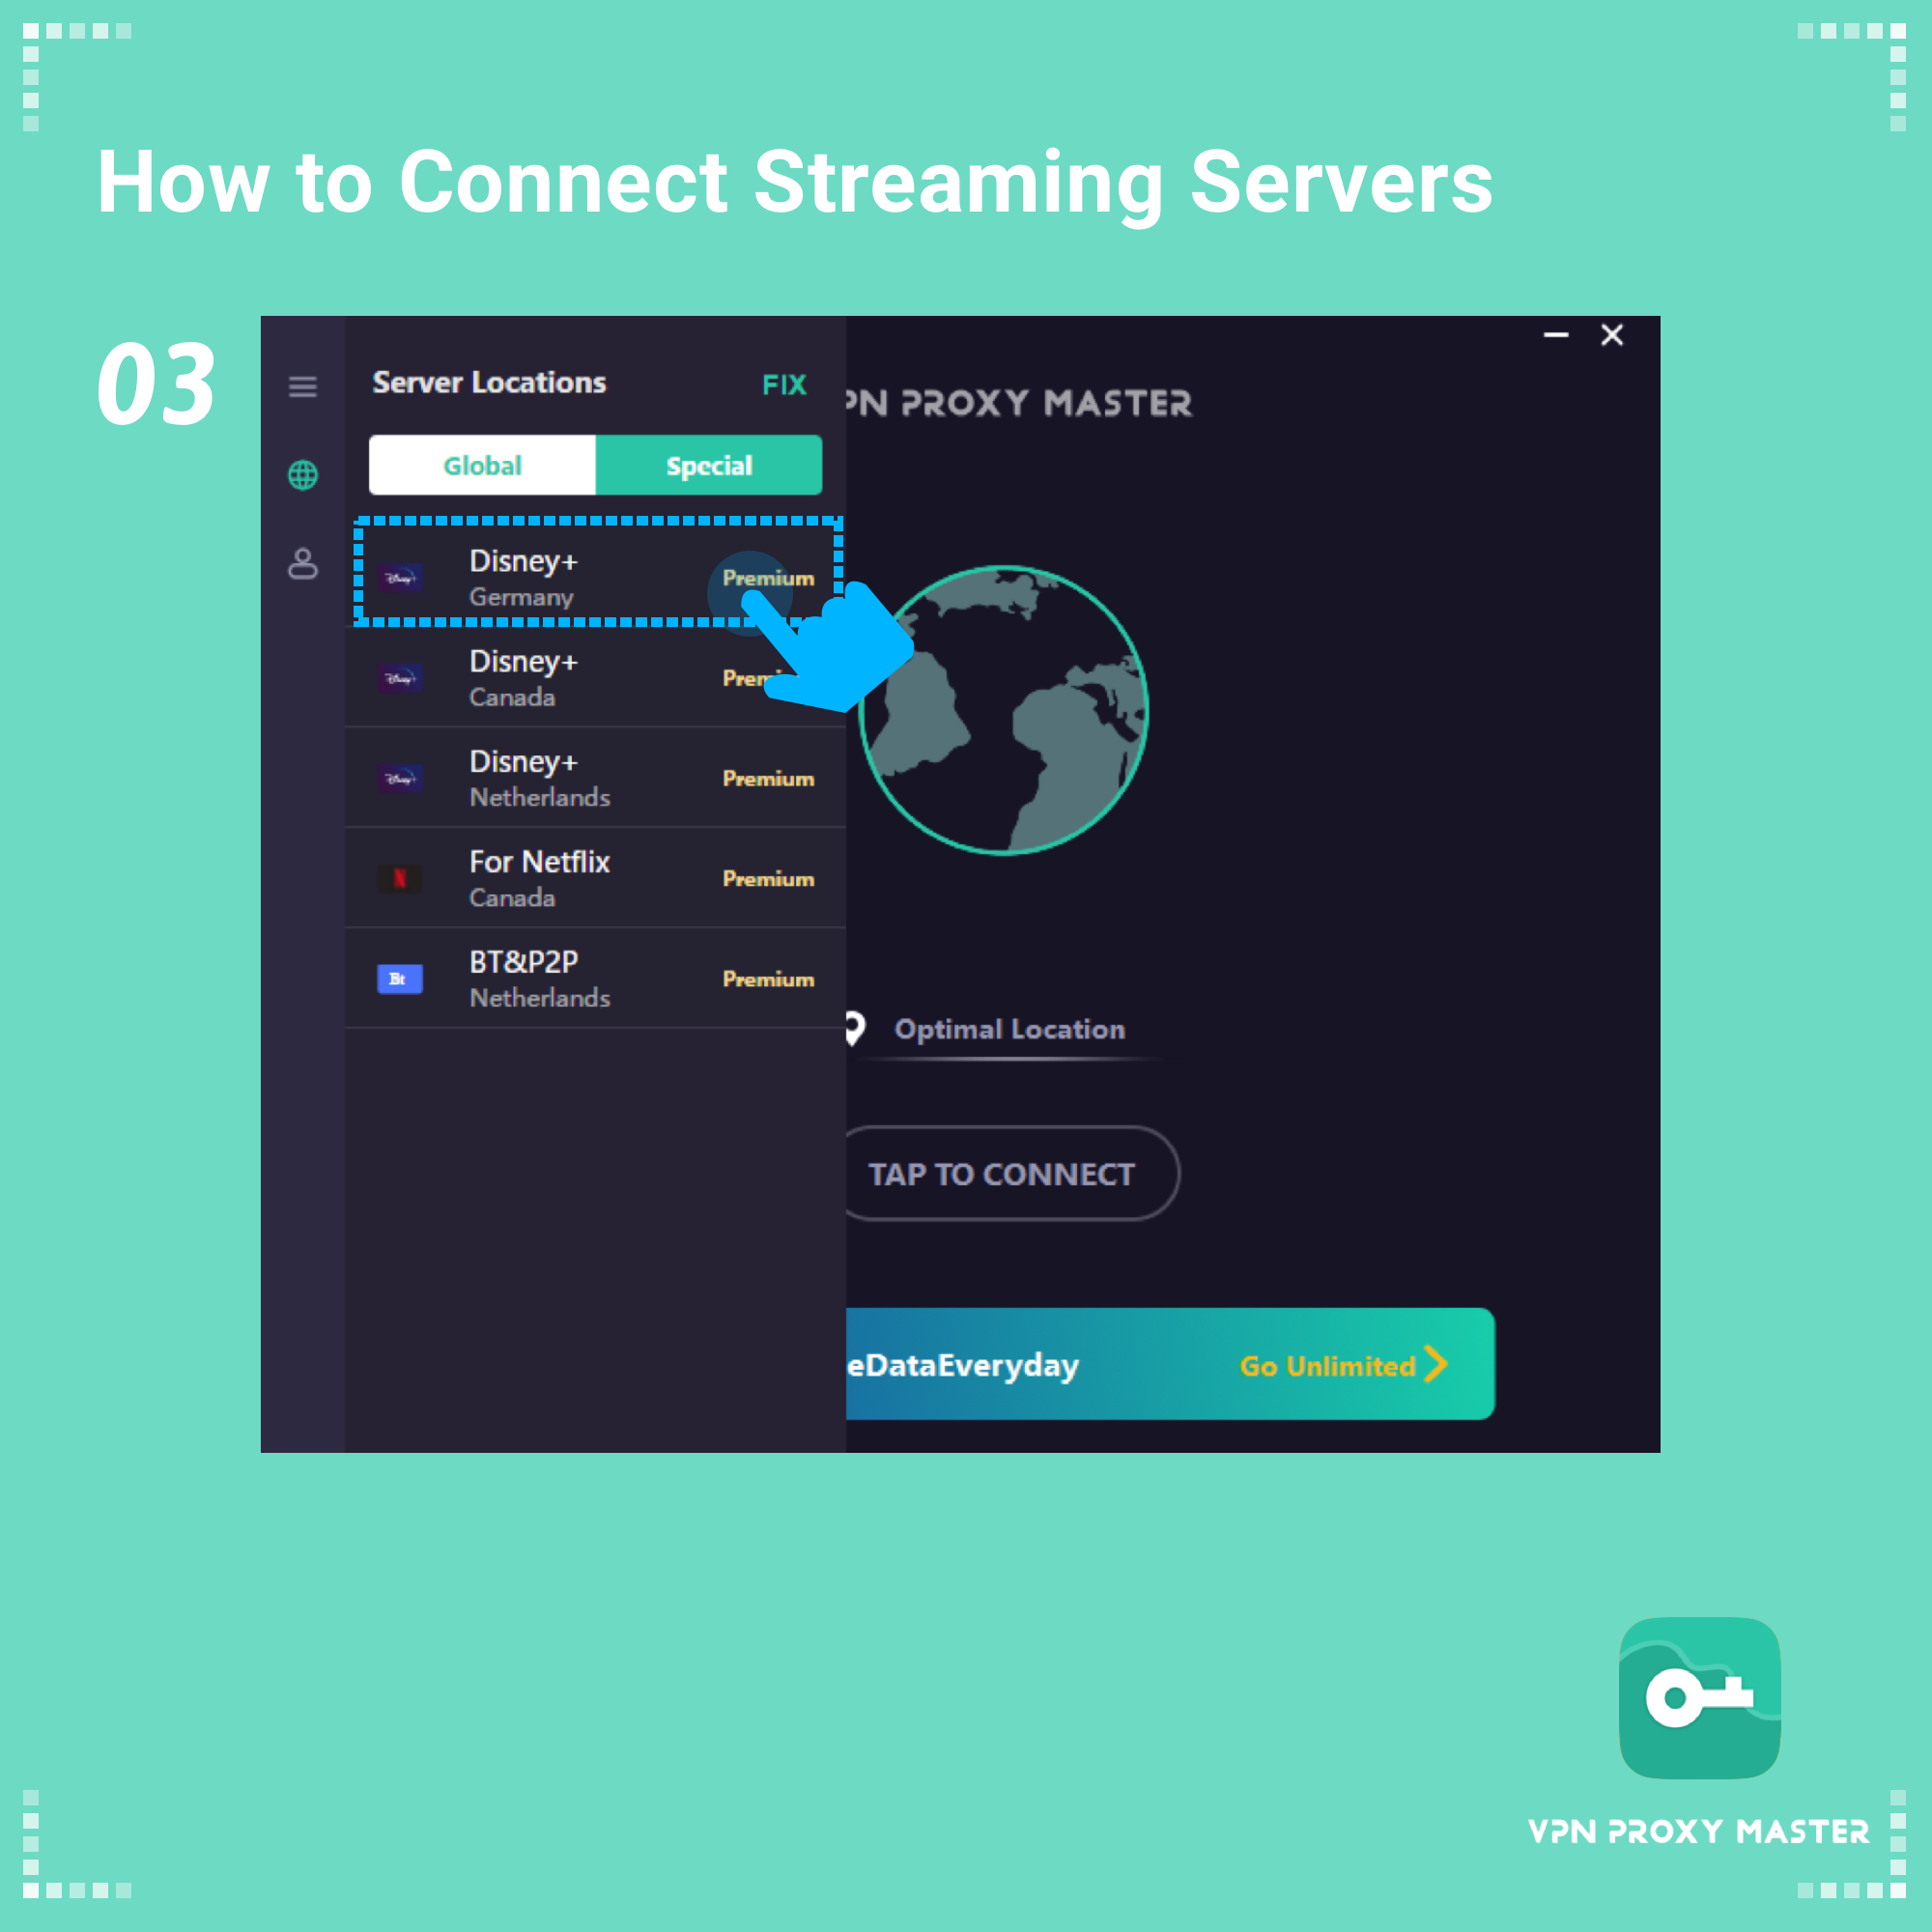 win-How_to_Connect_Streaming_Servers2.png